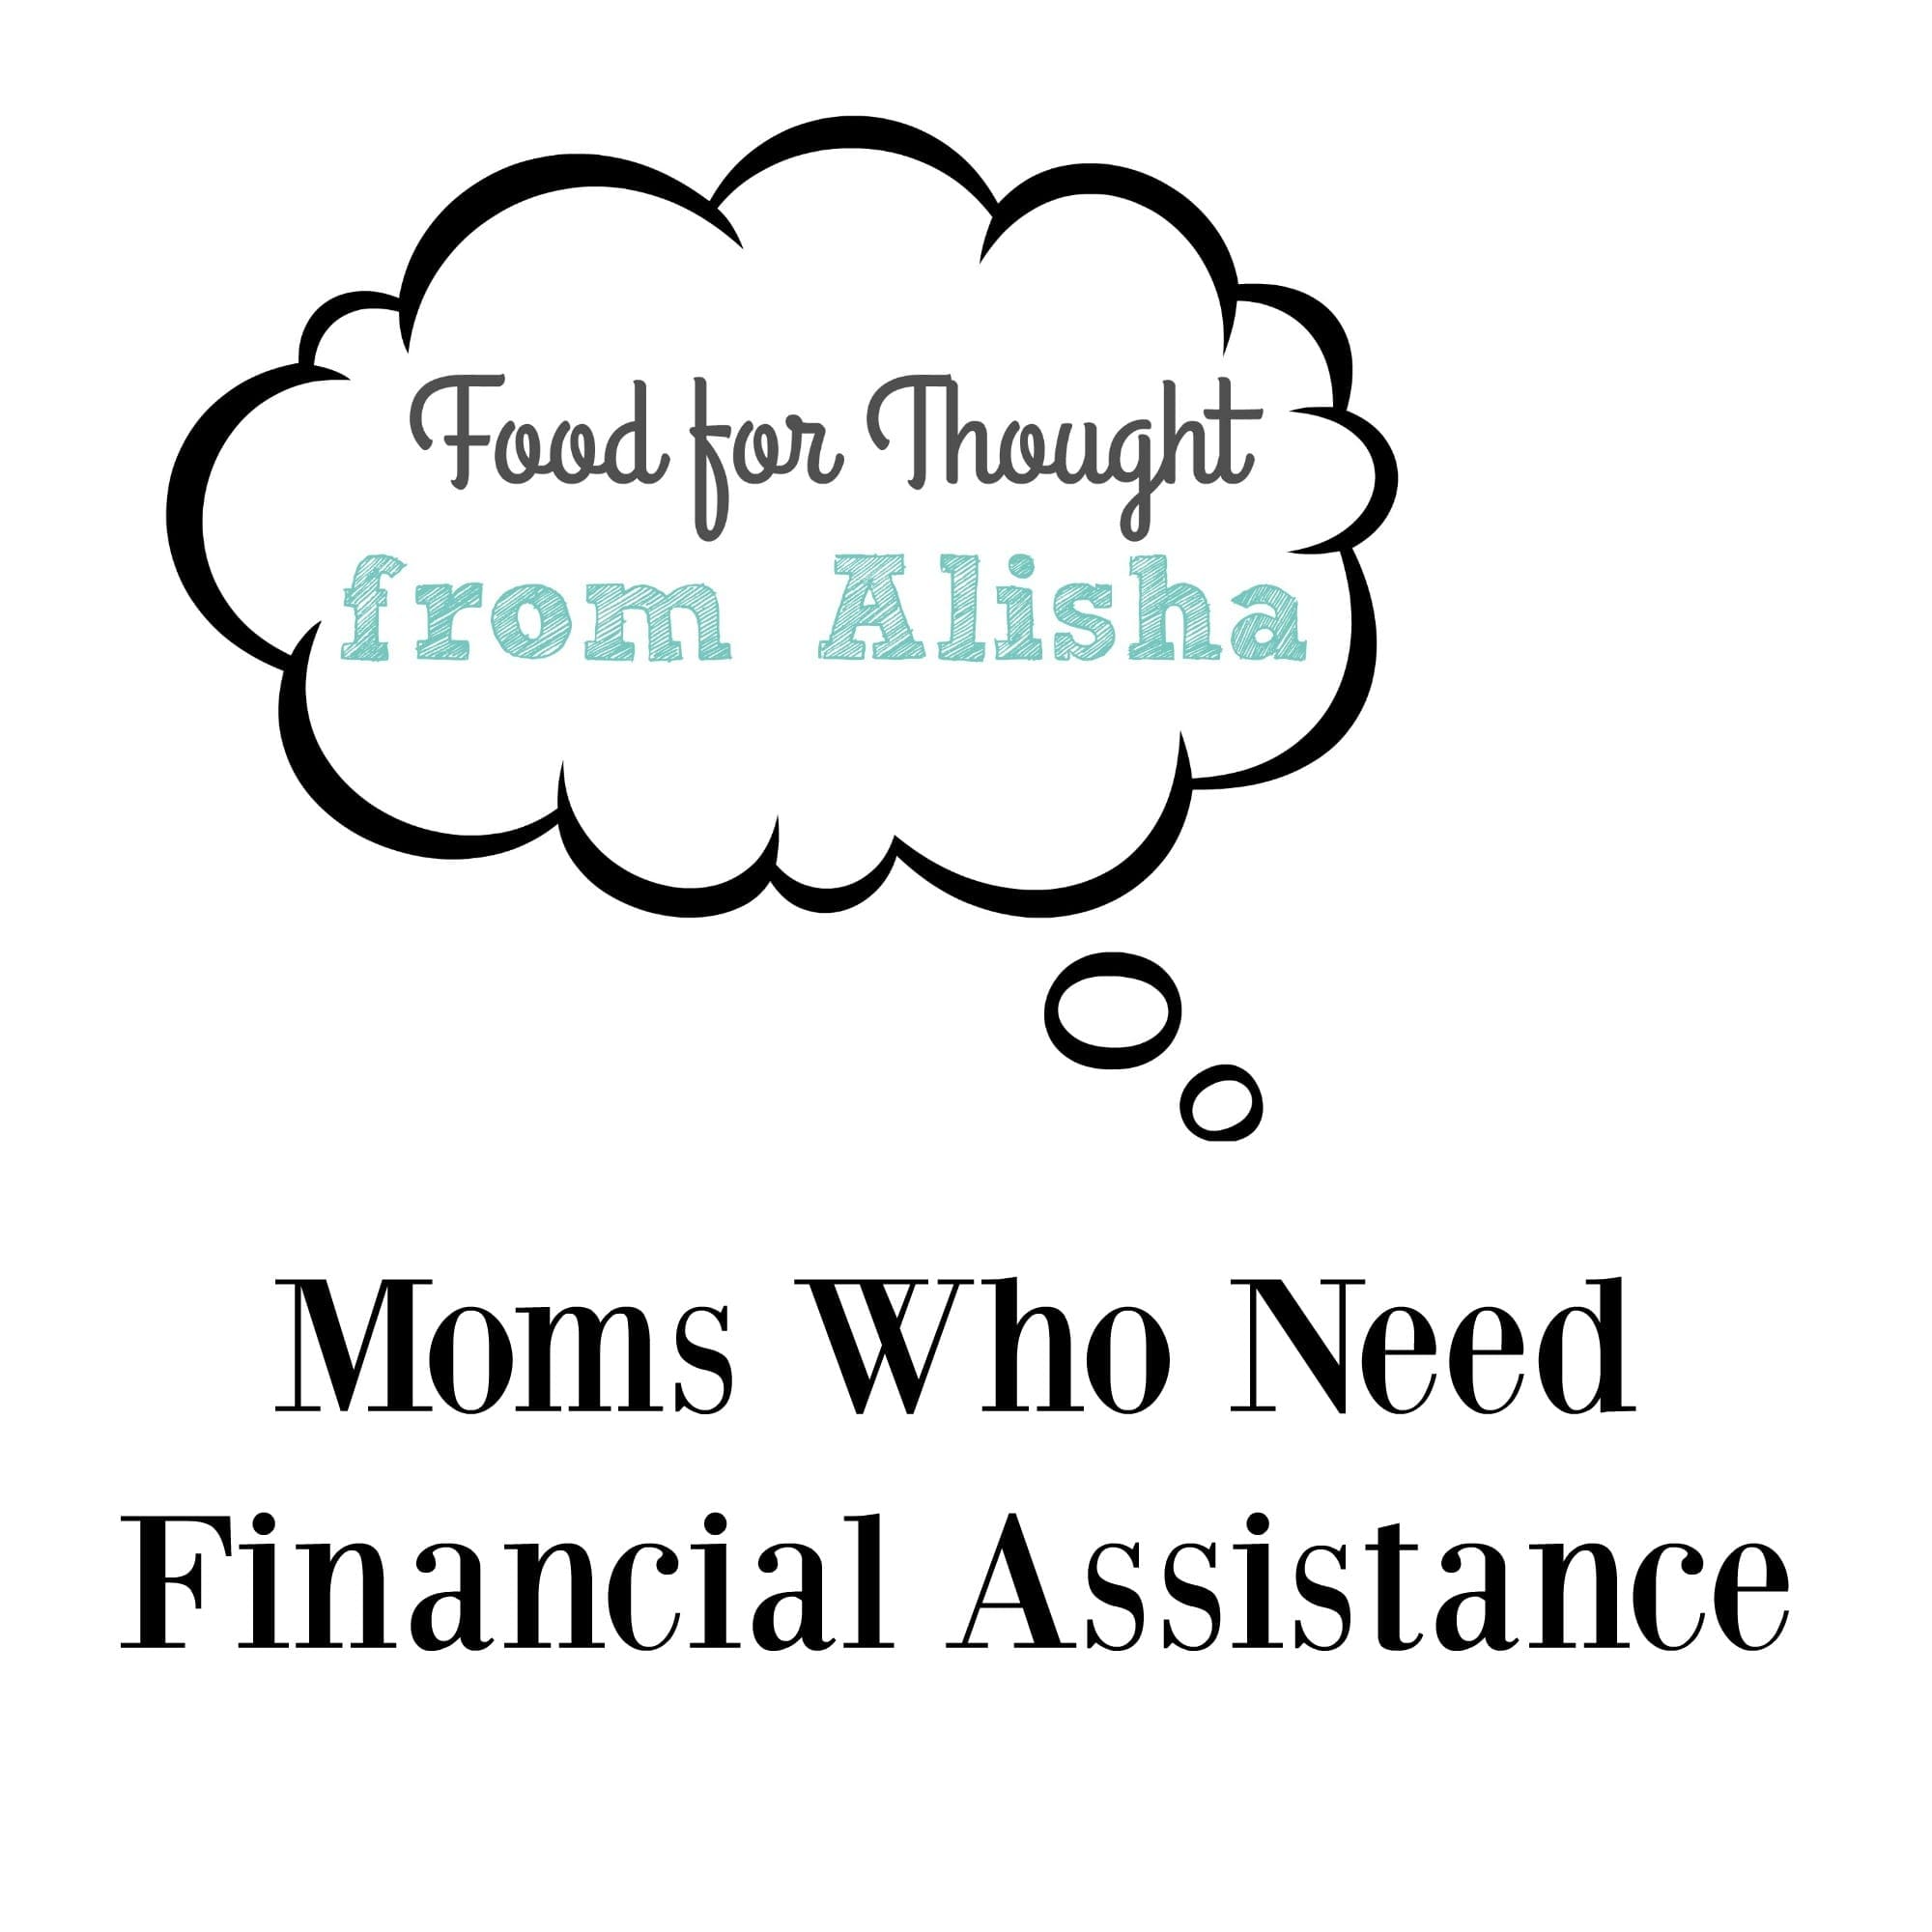 Moms who need financial assistance